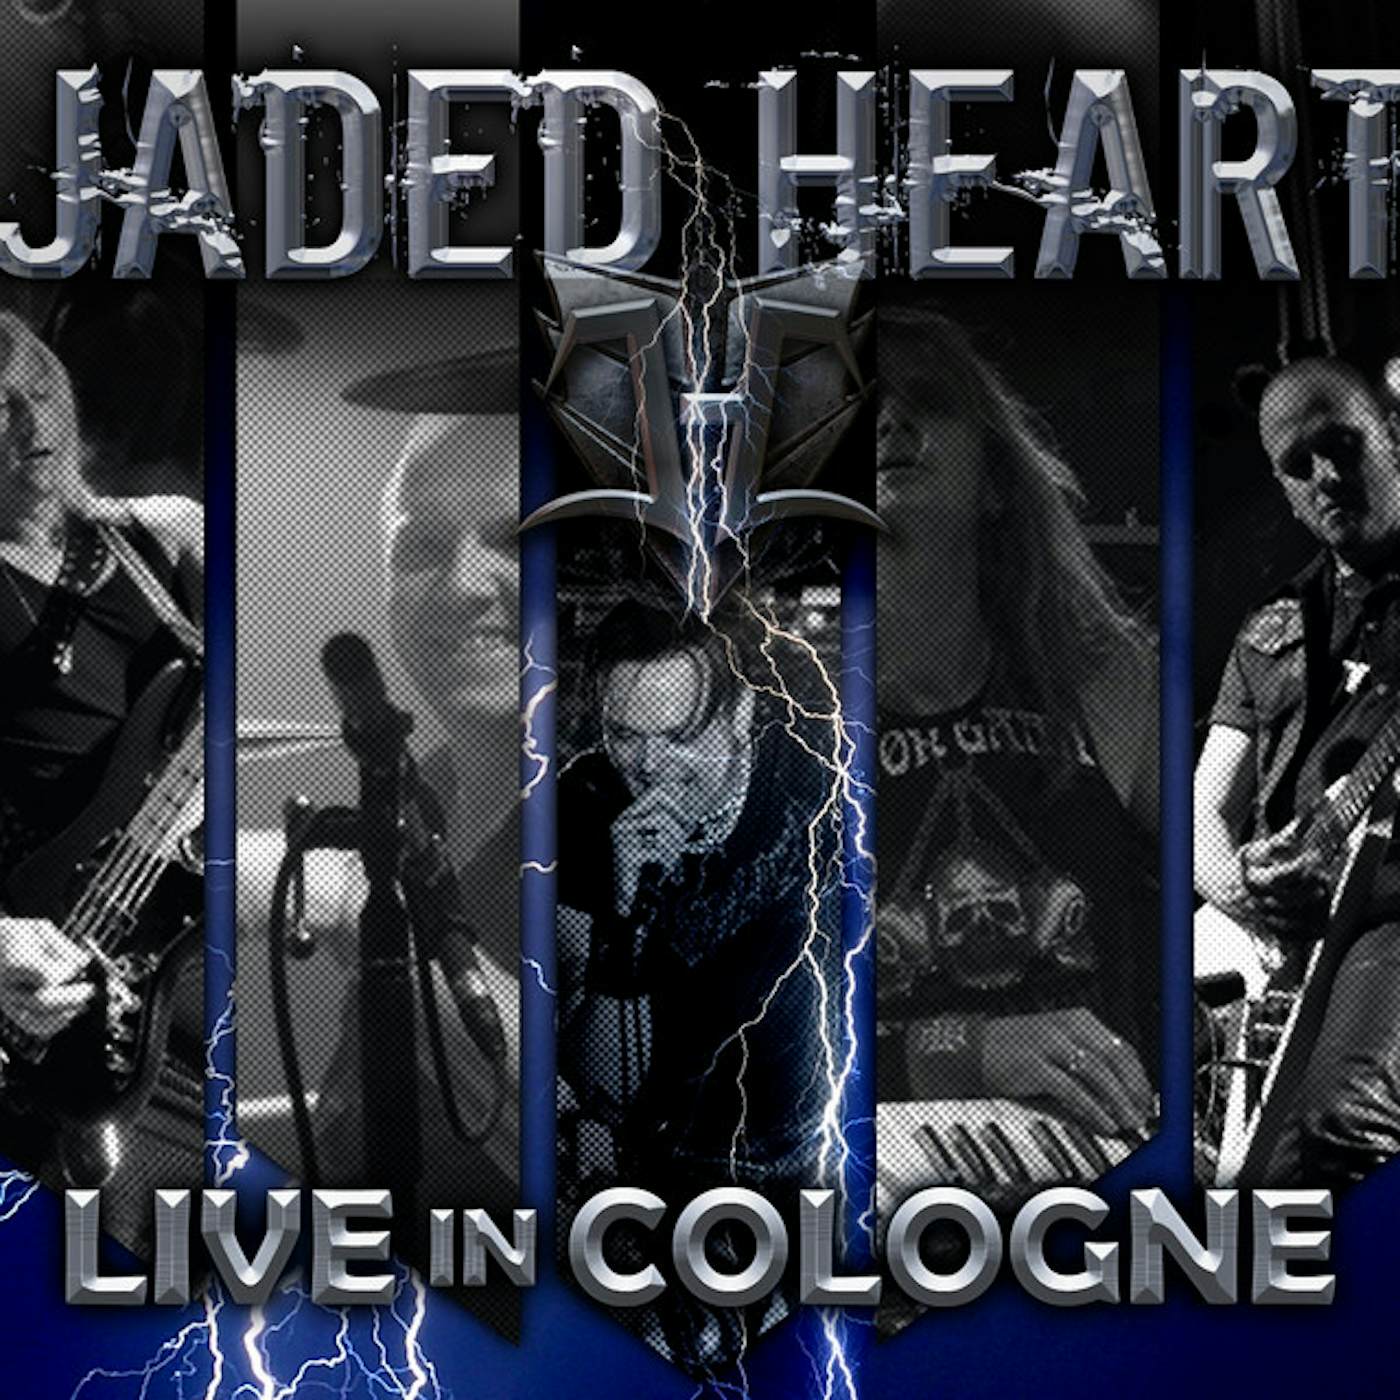 Jaded Heart LIVE IN COLOGNE CD